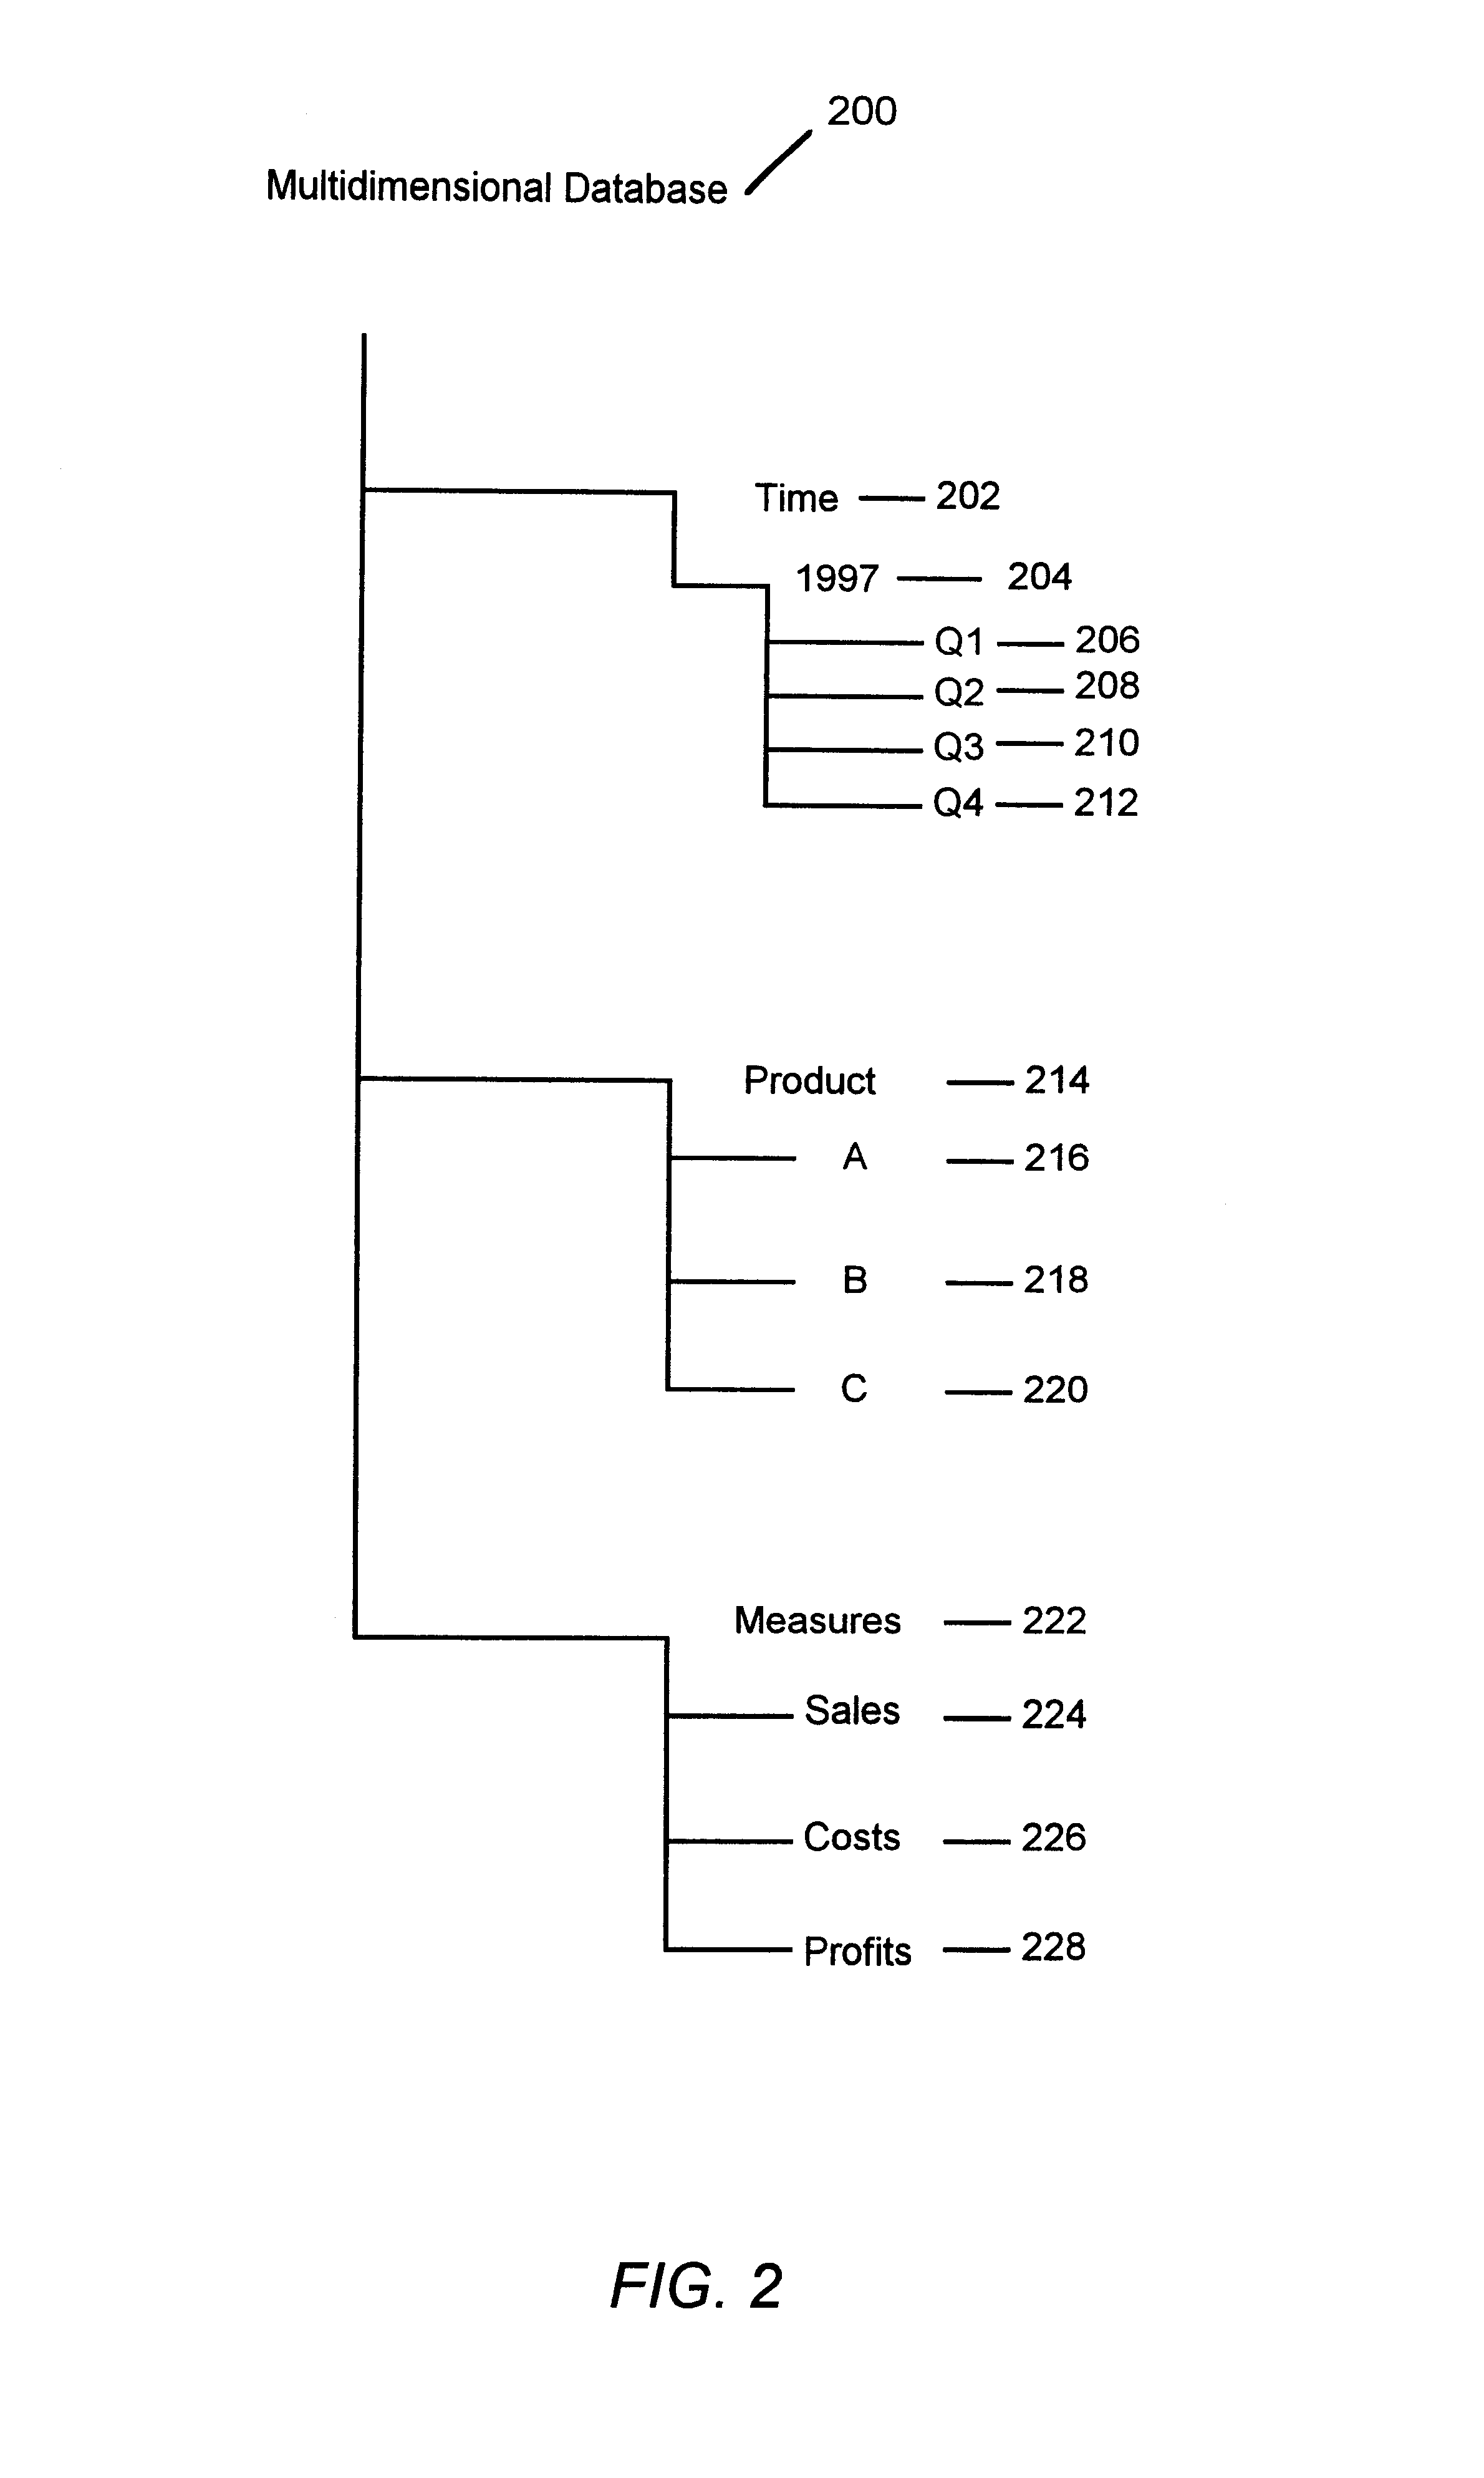 Performance of table insertion by using multiple tables or multiple threads